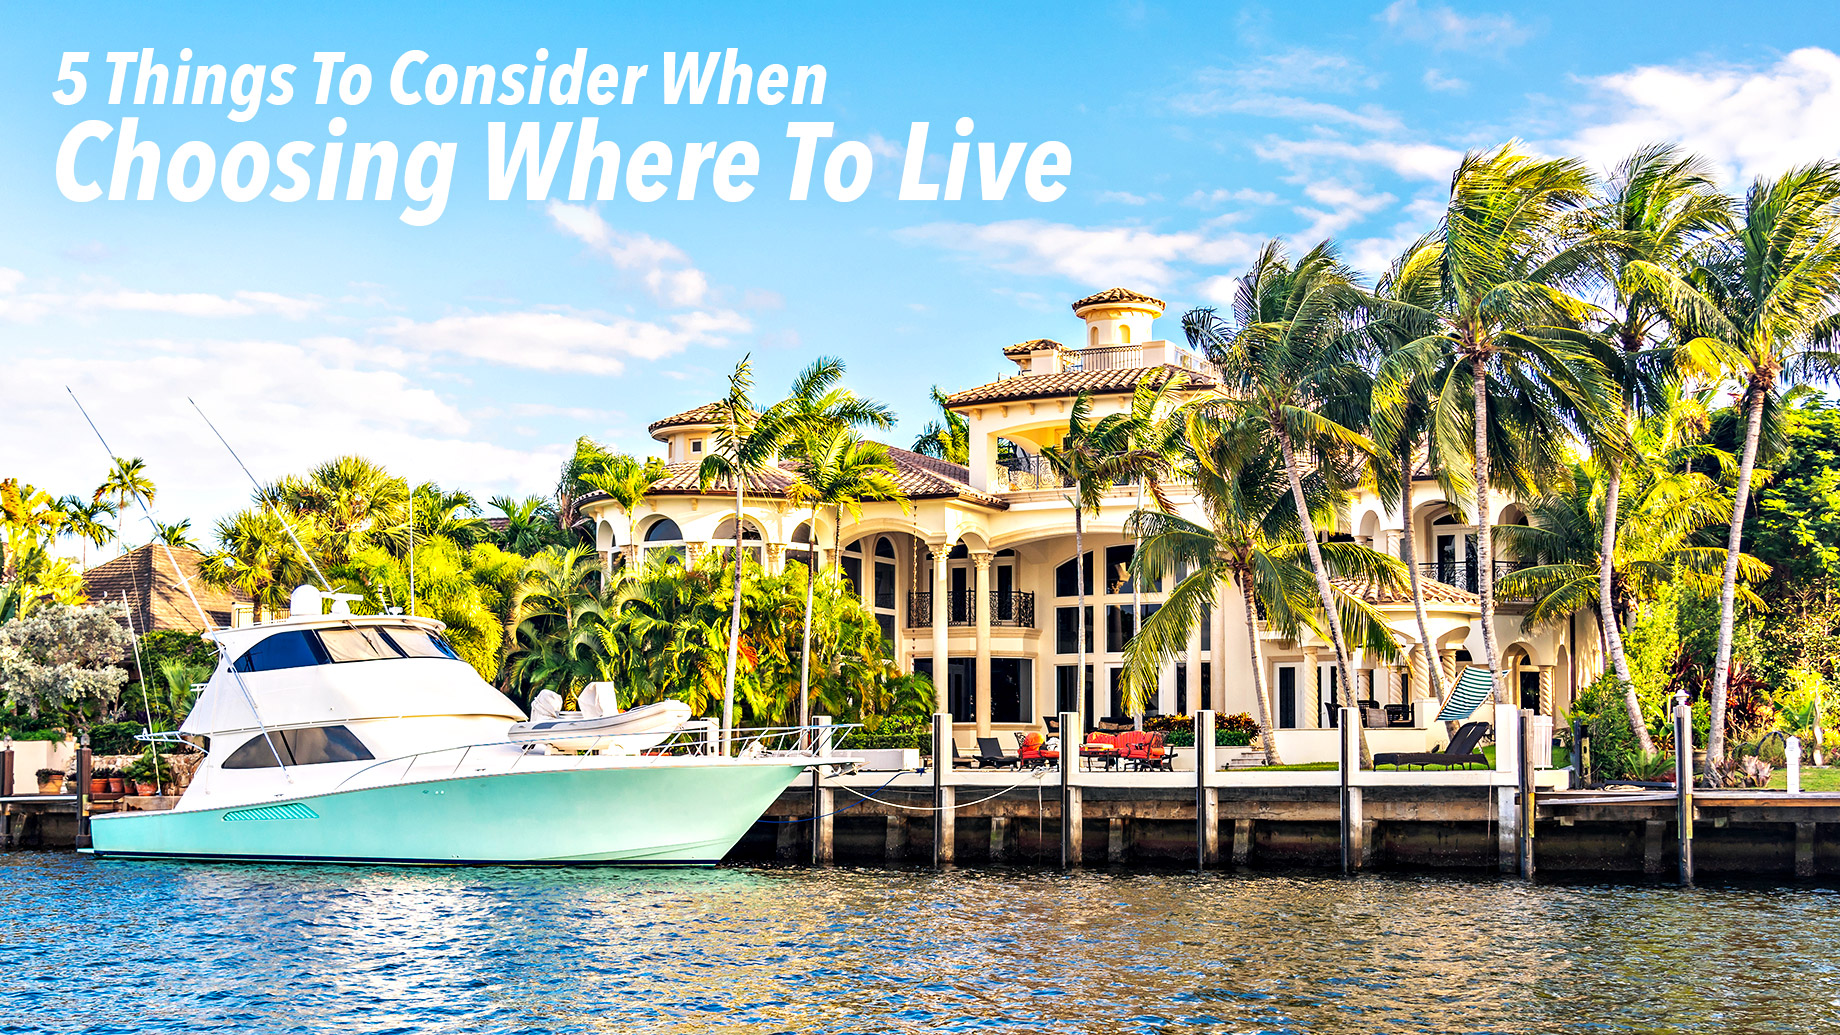 5 Things To Consider When Choosing Where To Live